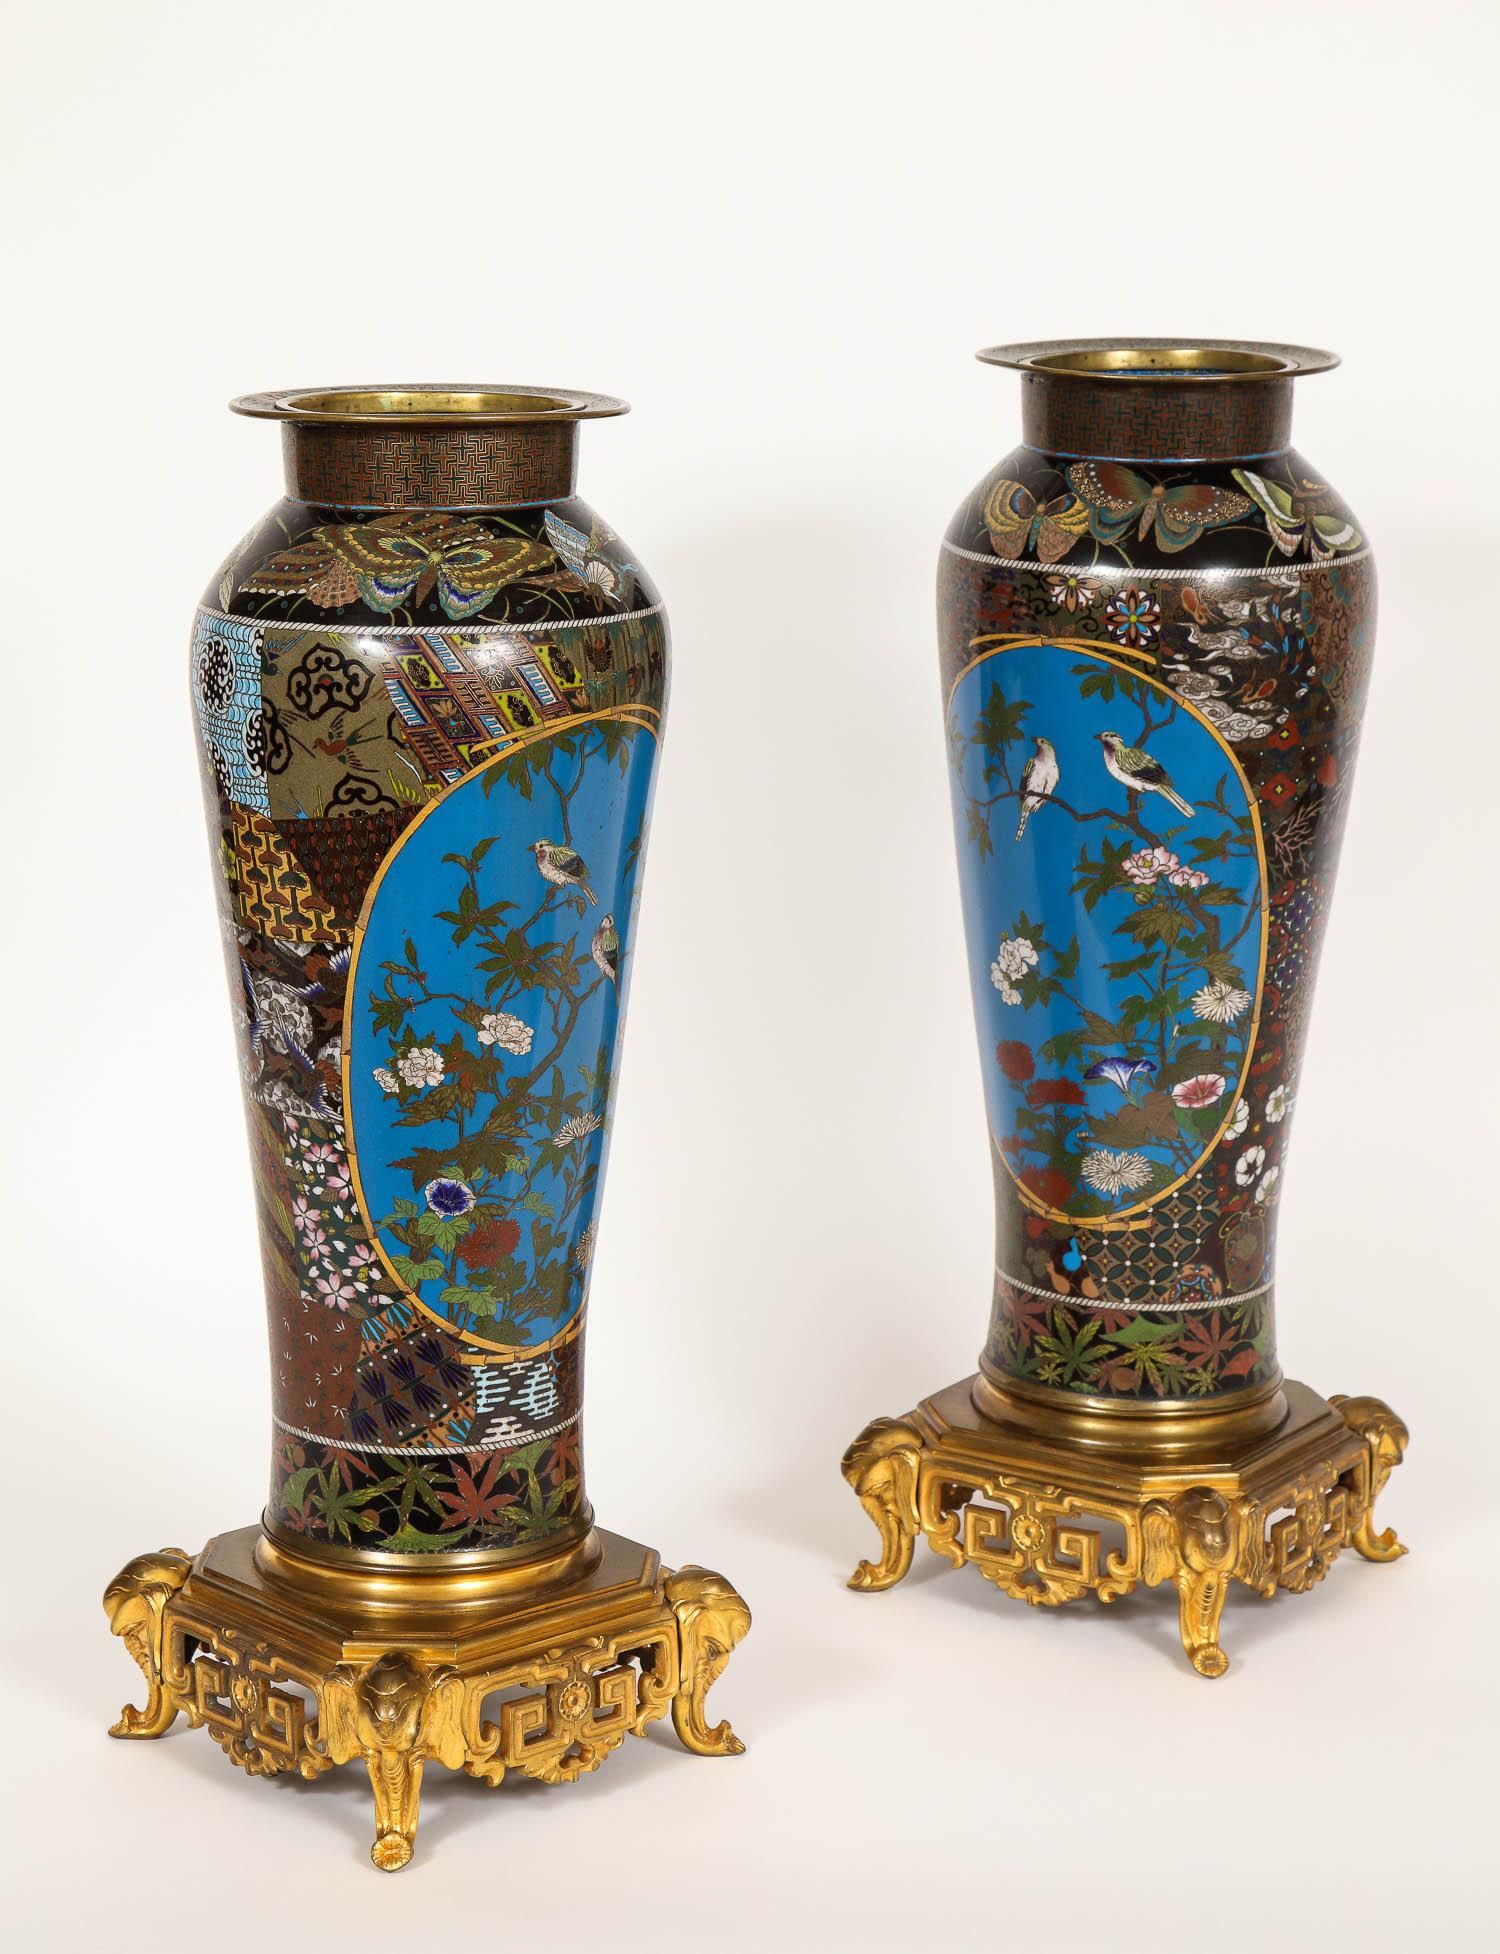 Japonisme Pair of Meji Period Japanese Cloisonne Thousand Butterfly Vases, Barbedienne